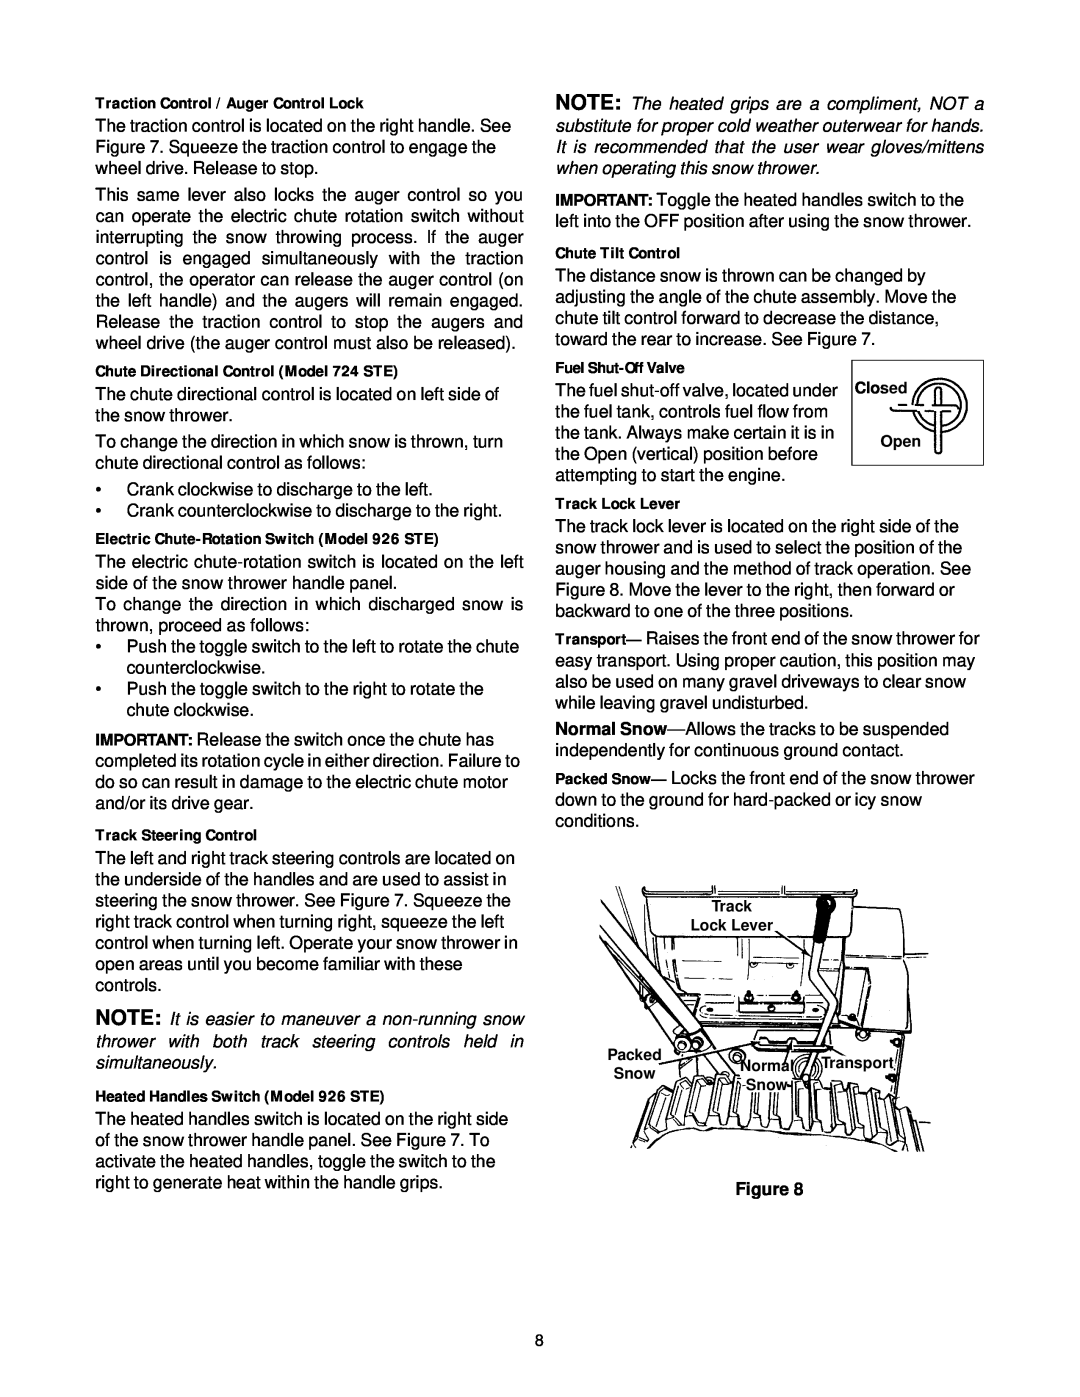 Cub Cadet manual Traction Control / Auger Control Lock, Chute Directional Control Model 724 STE, Track Steering Control 